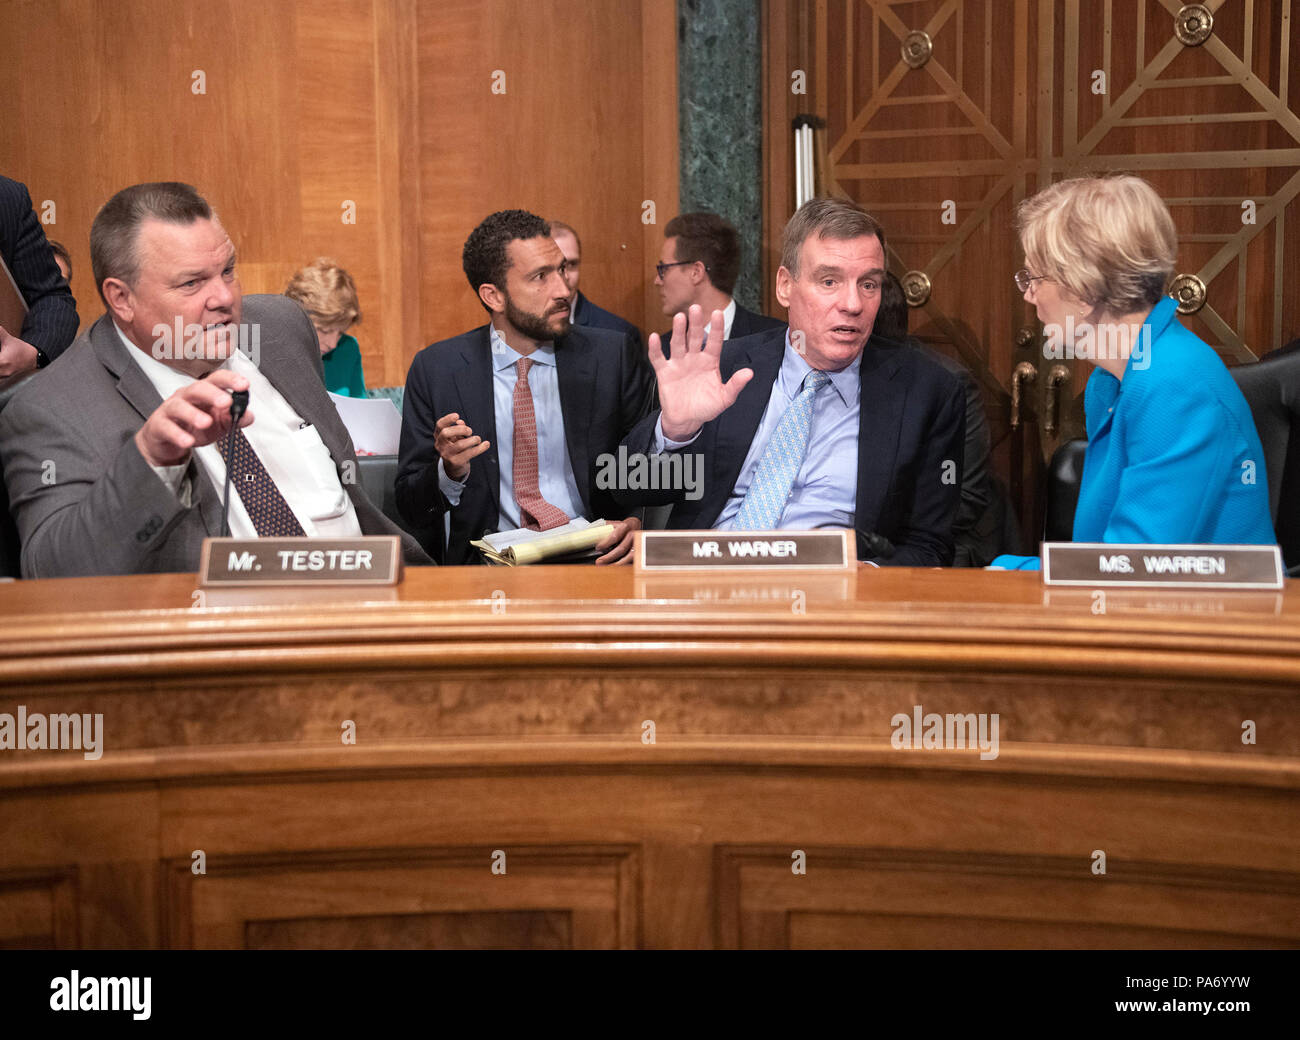 United Staters Senators Jon Tester (Democrat of Montana), left, Mark Warner (Democrat of Virginia), center, and Elizabeth Warren (Democrat of Massachusetts), right, prior to hearing Kathleen Laura Kraninger testify before the United States Senate Committee on Basnking, Housing and Urban Affairs on her nomination to be Director, Bureau of Consumer Financial Protection (CFPB) on Capitol Hill in Washington, DC on Thursday, July 19, 2018. Credit: Ron Sachs/CNP | usage worldwide Stock Photo